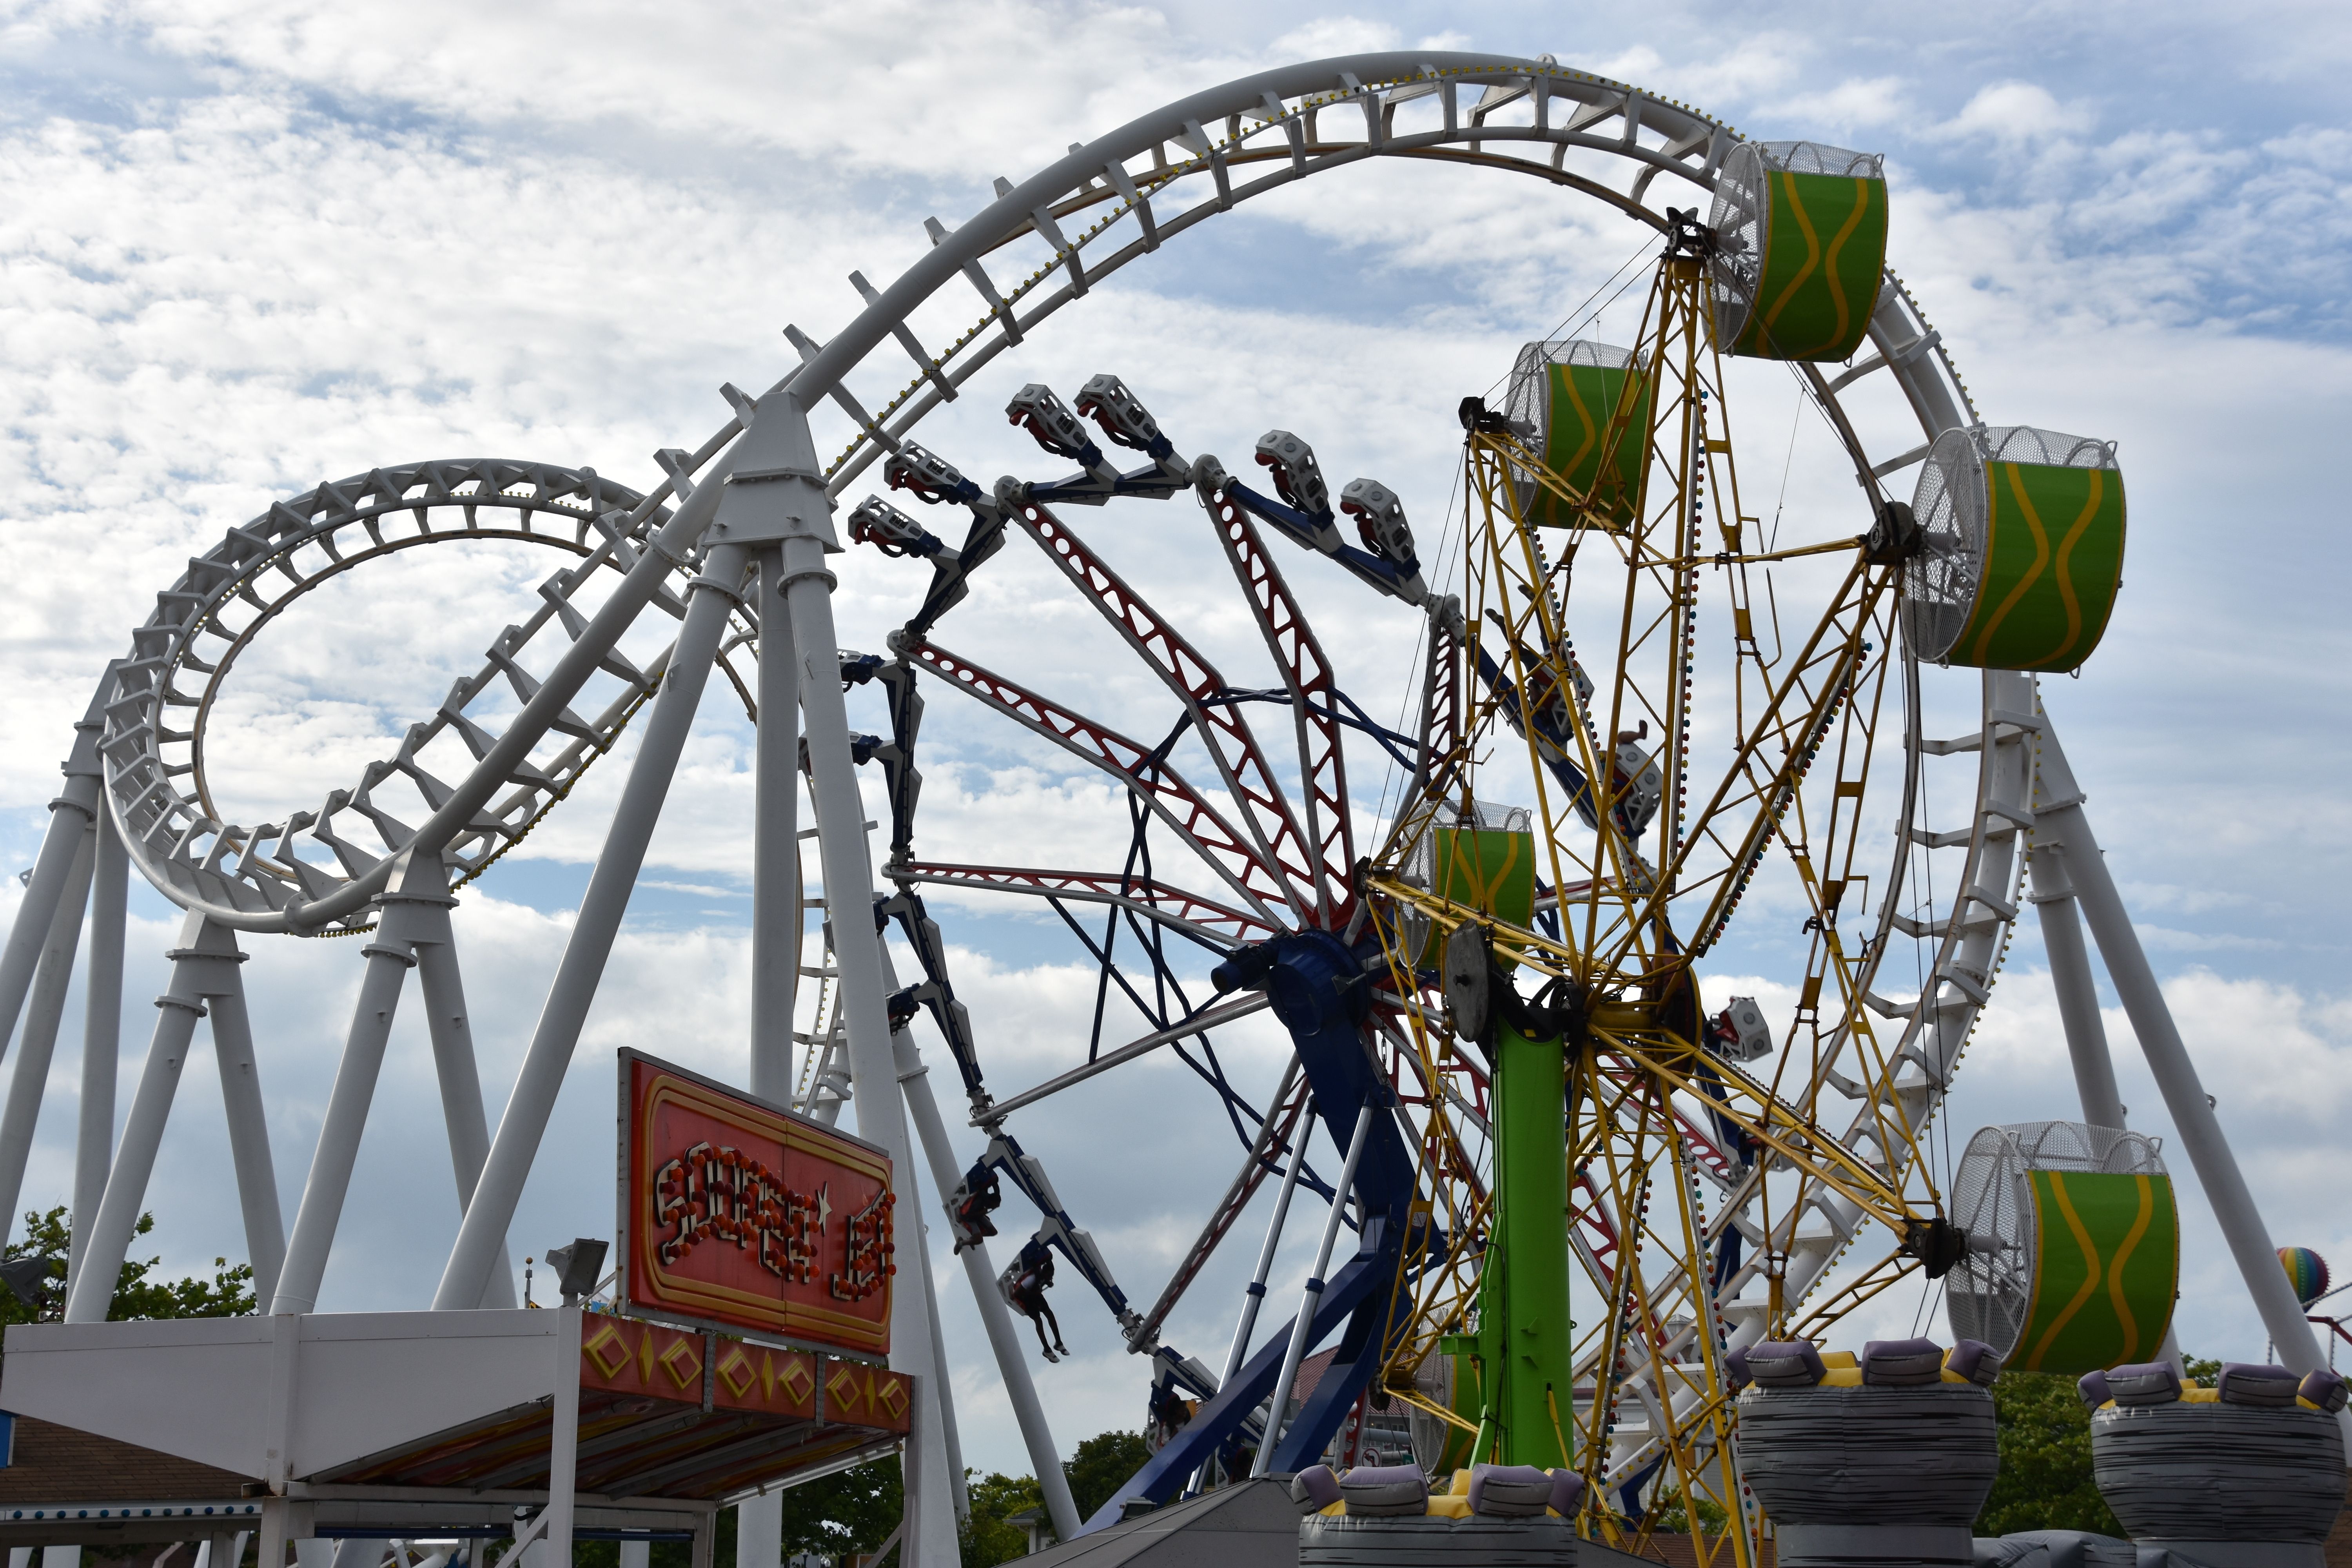 Trimpers Rides in Ocean City, Maryland